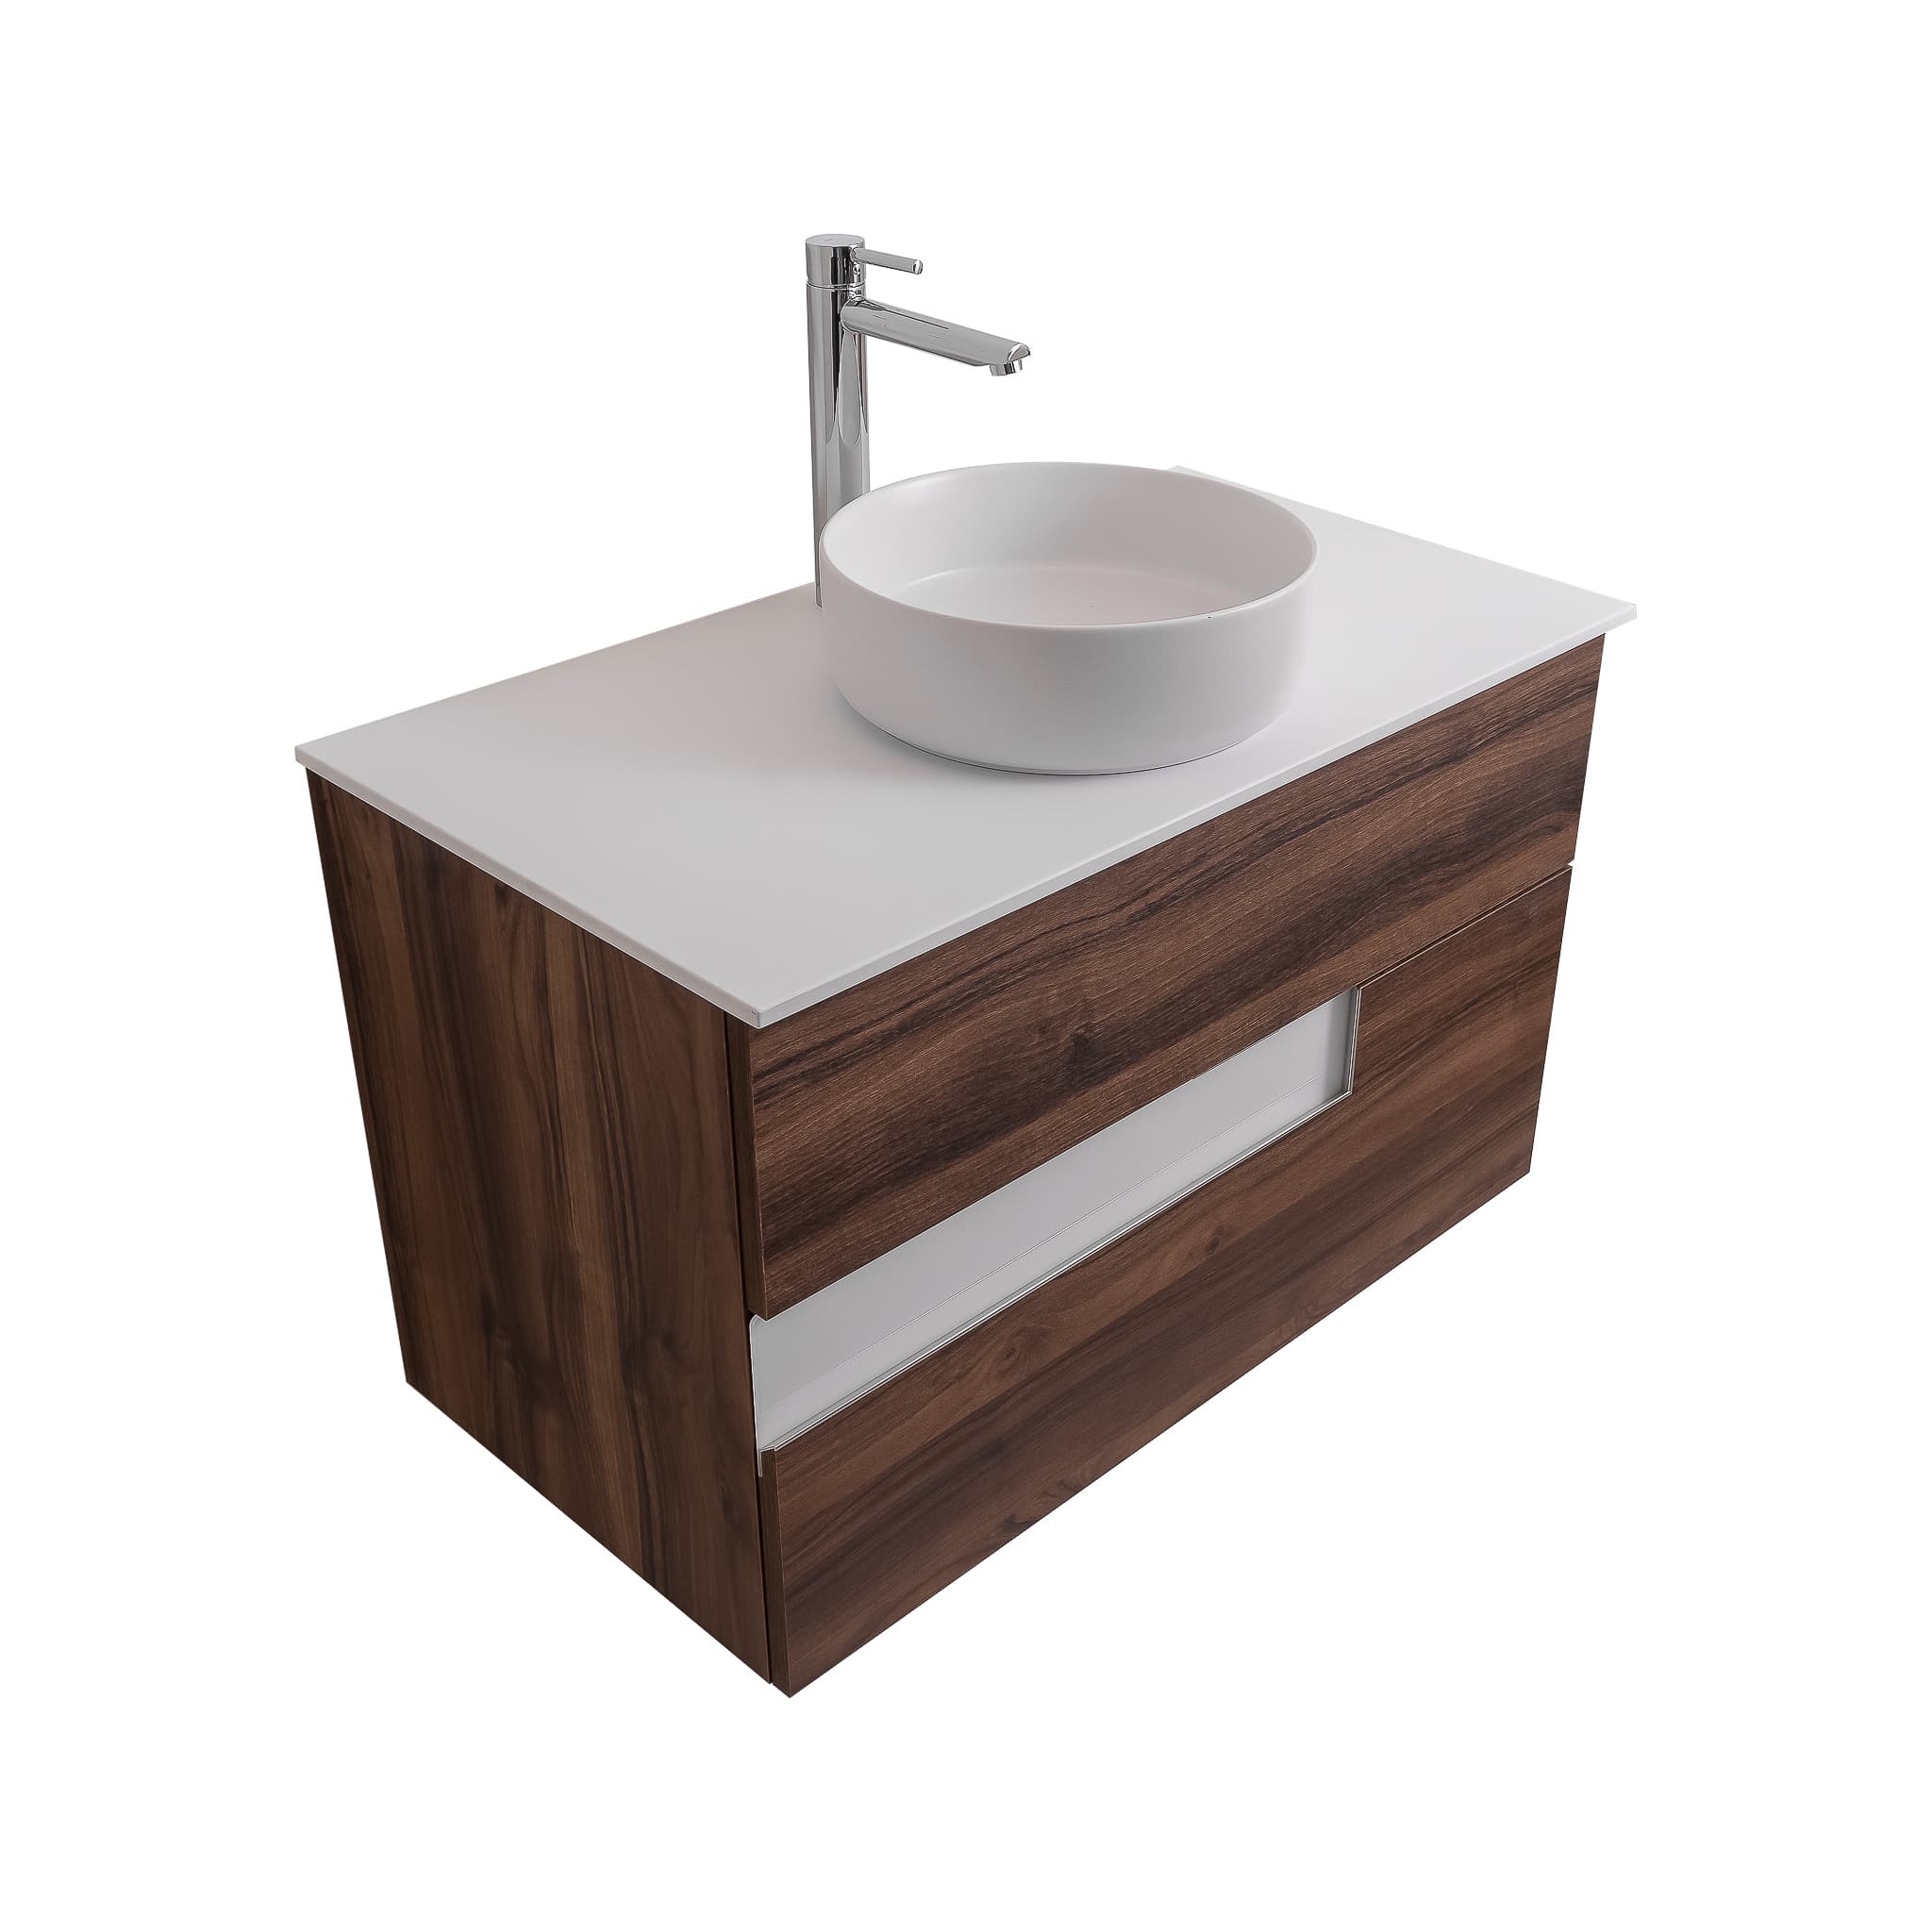 Vision 47.5 Valenti Medium Brown Wood Cabinet, Ares White Top And Ares White Ceramic Basin, Wall Mounted Modern Vanity Set